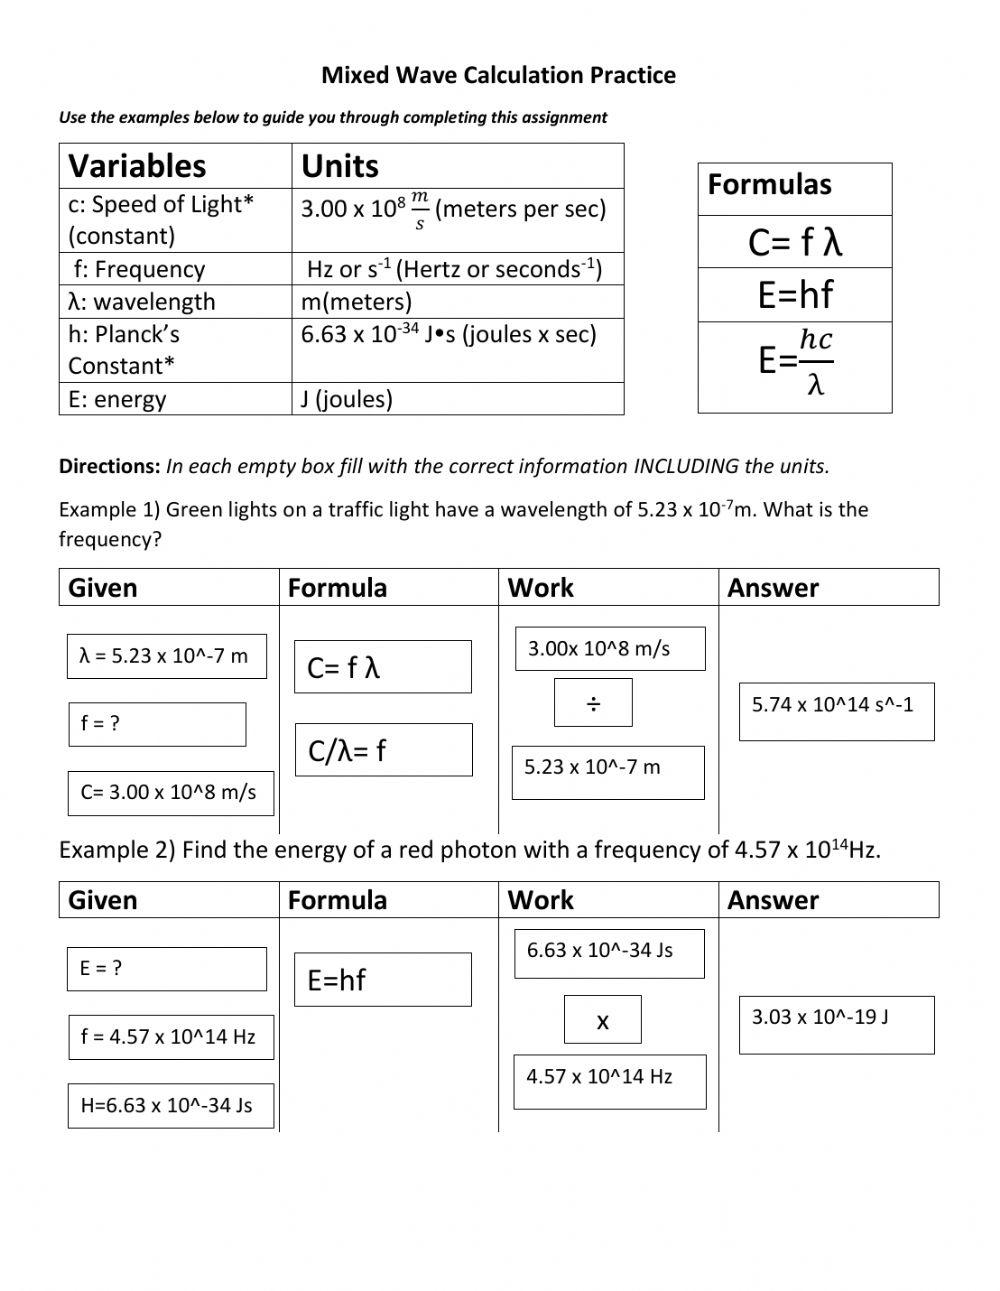 Mixed Wave Calculations